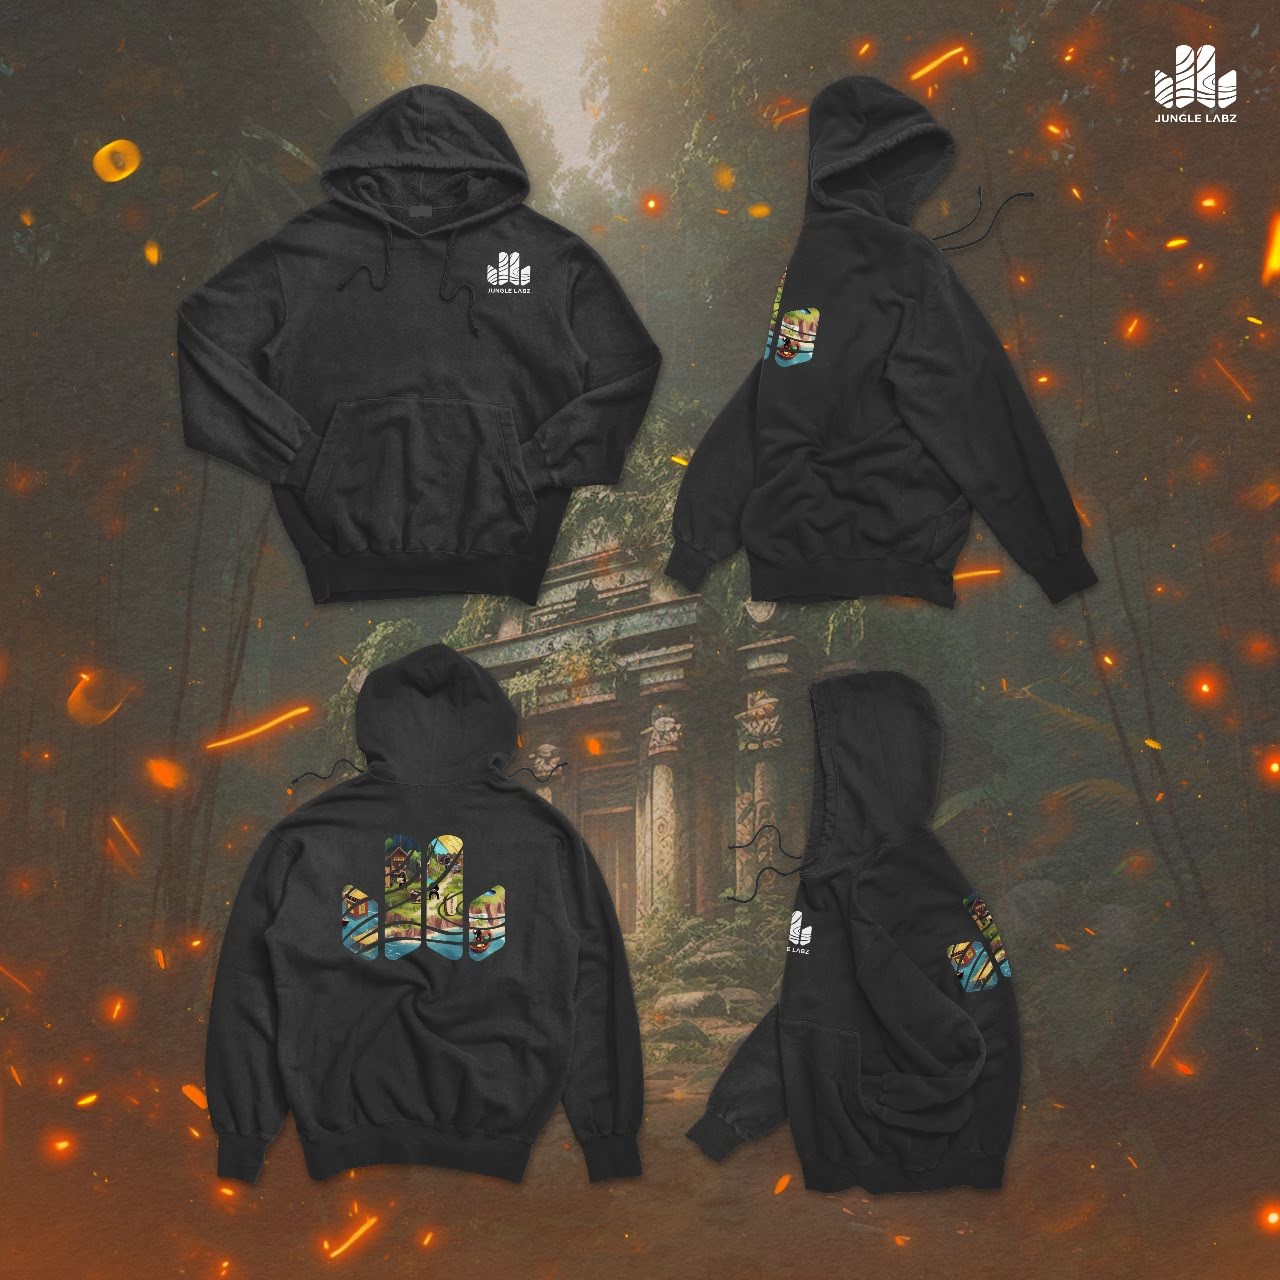 Jungle Labz Hoodie - Limited Edition